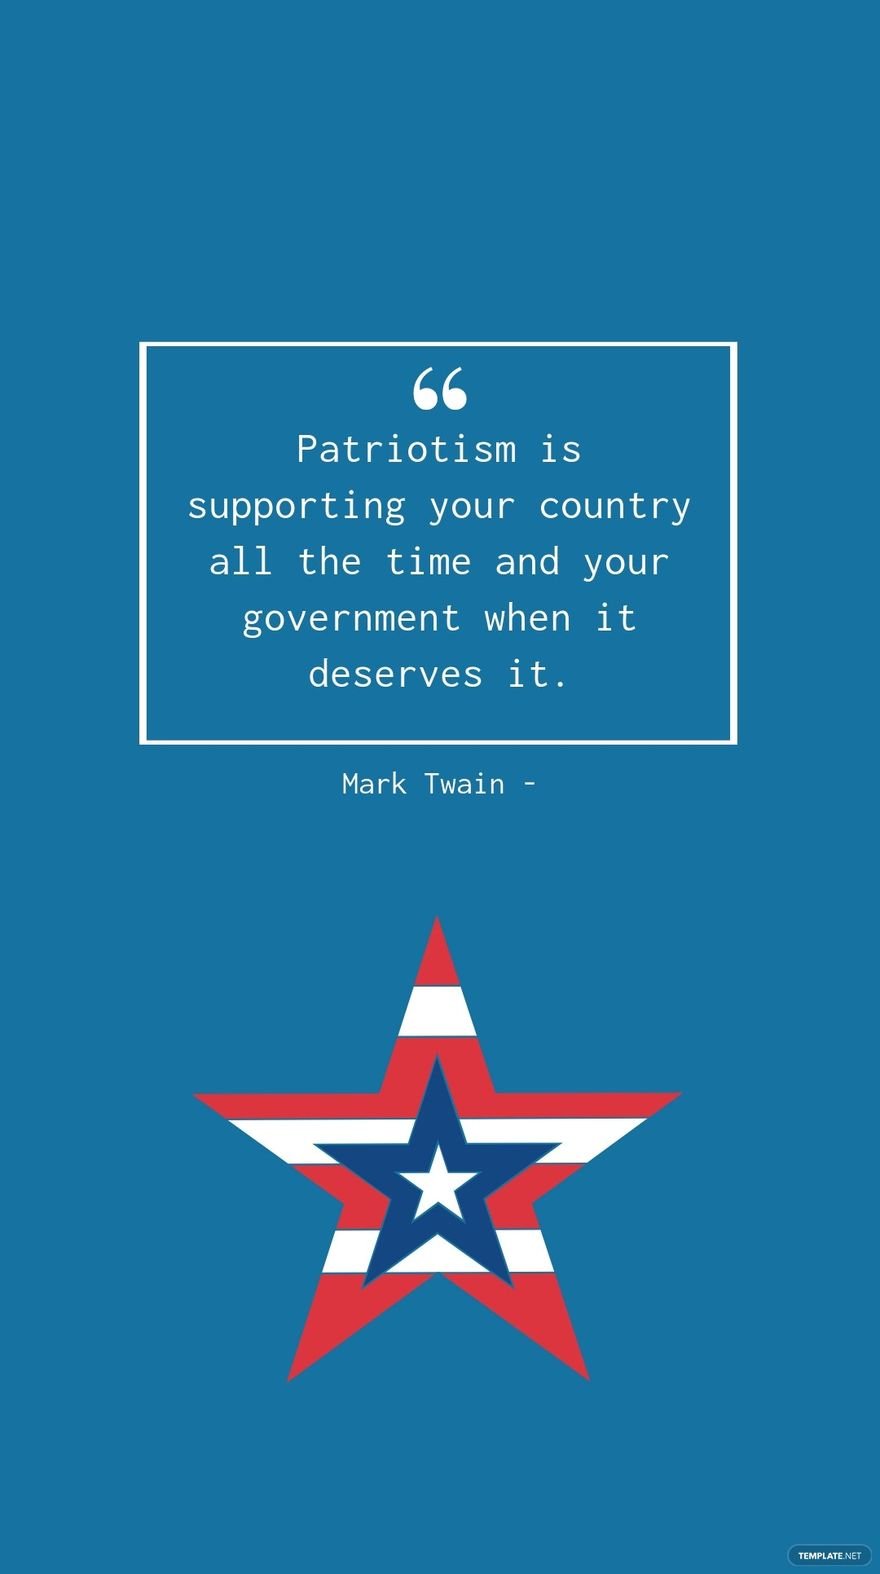 Free Mark Twain - Patriotism is supporting your country all the time and your government when it deserves it. in JPG